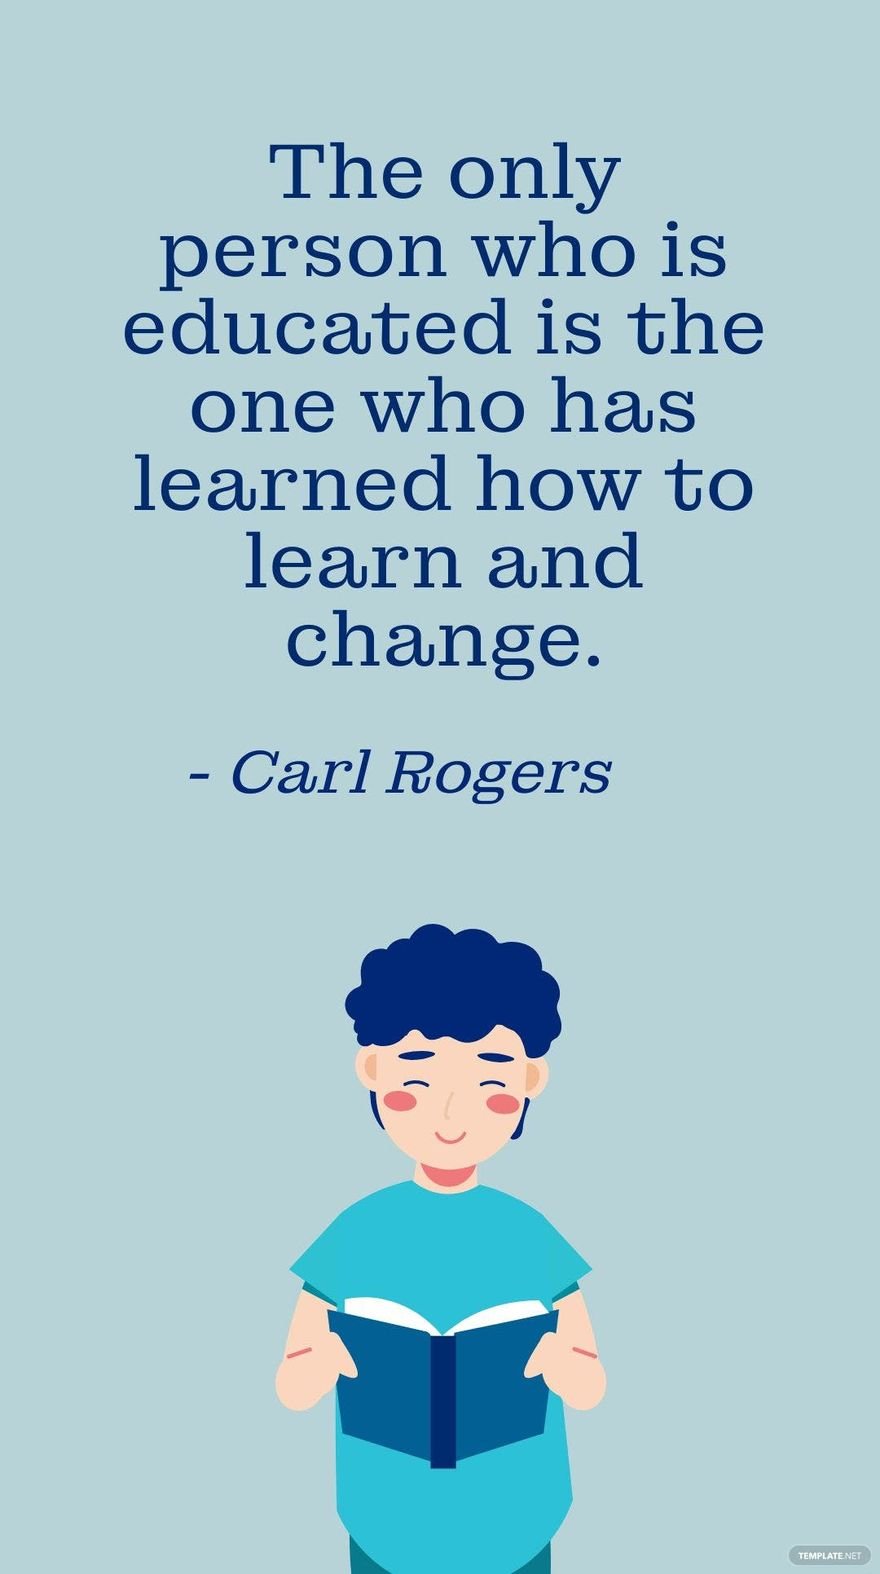 Carl Rogers - The only person who is educated is the one who has learned how to learn and change.